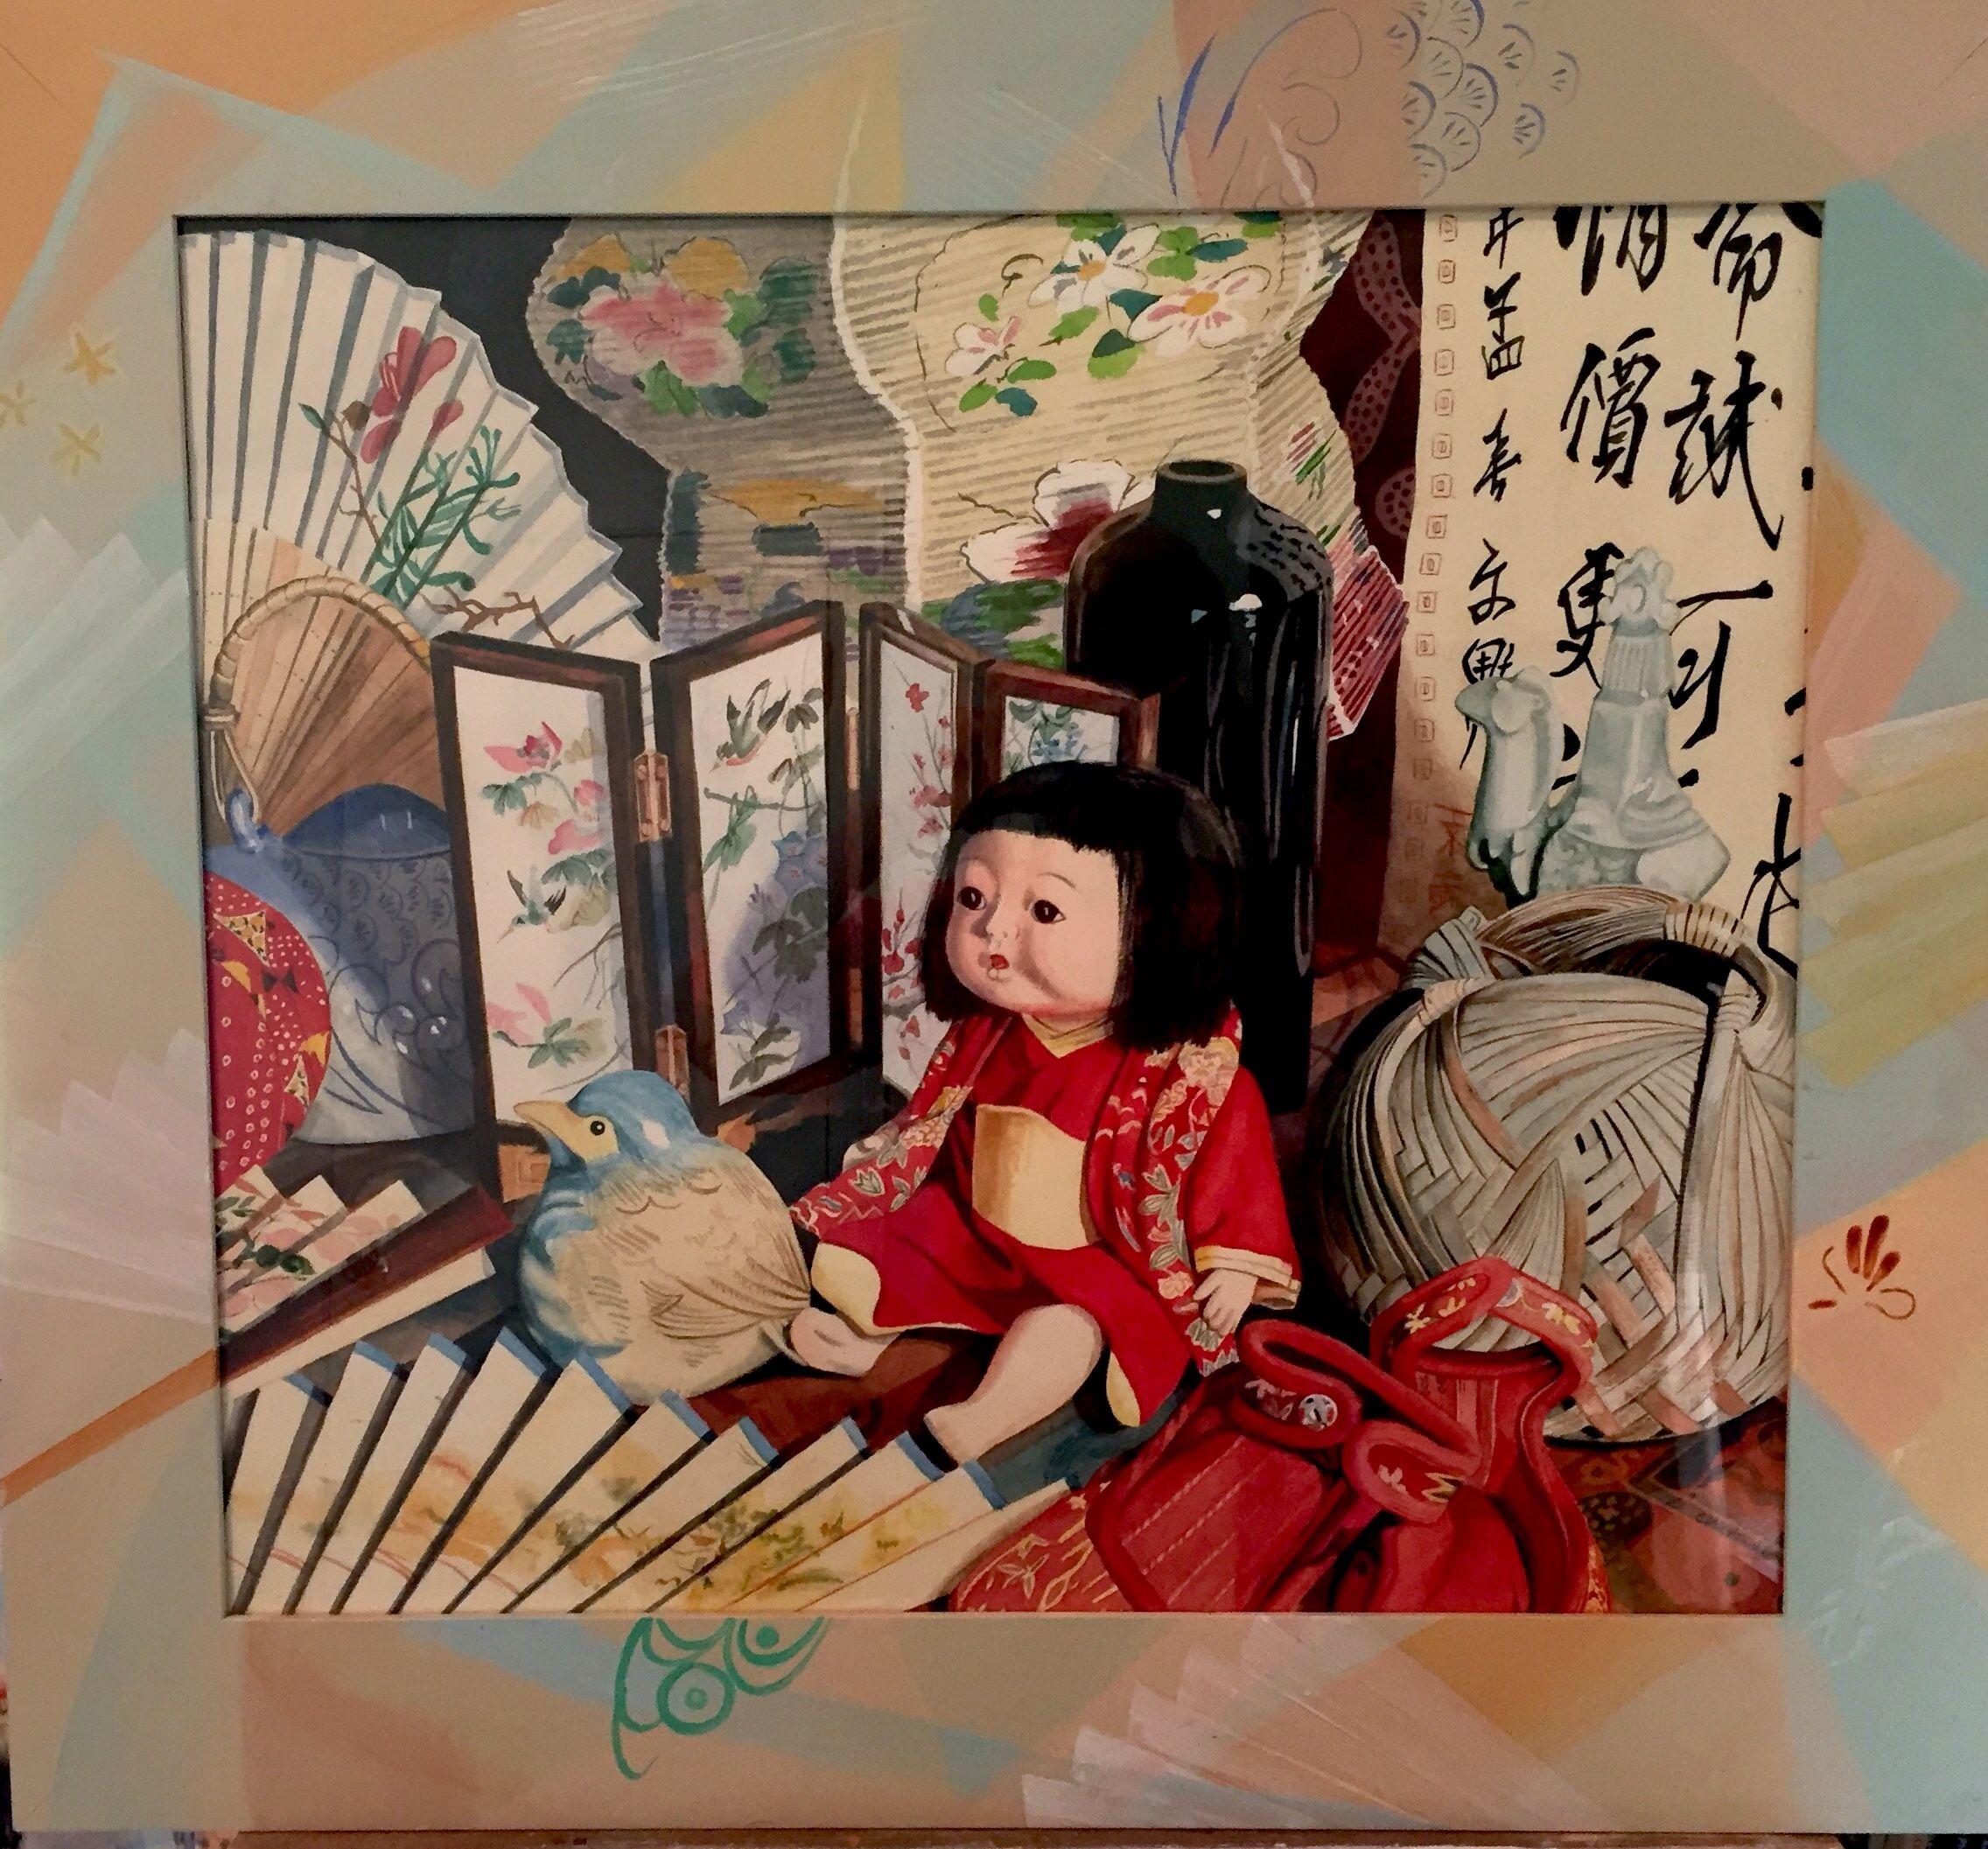 Chinatown Shop Window, Painting, Watercolor on Watercolor Paper - Art by Letty Oratowski